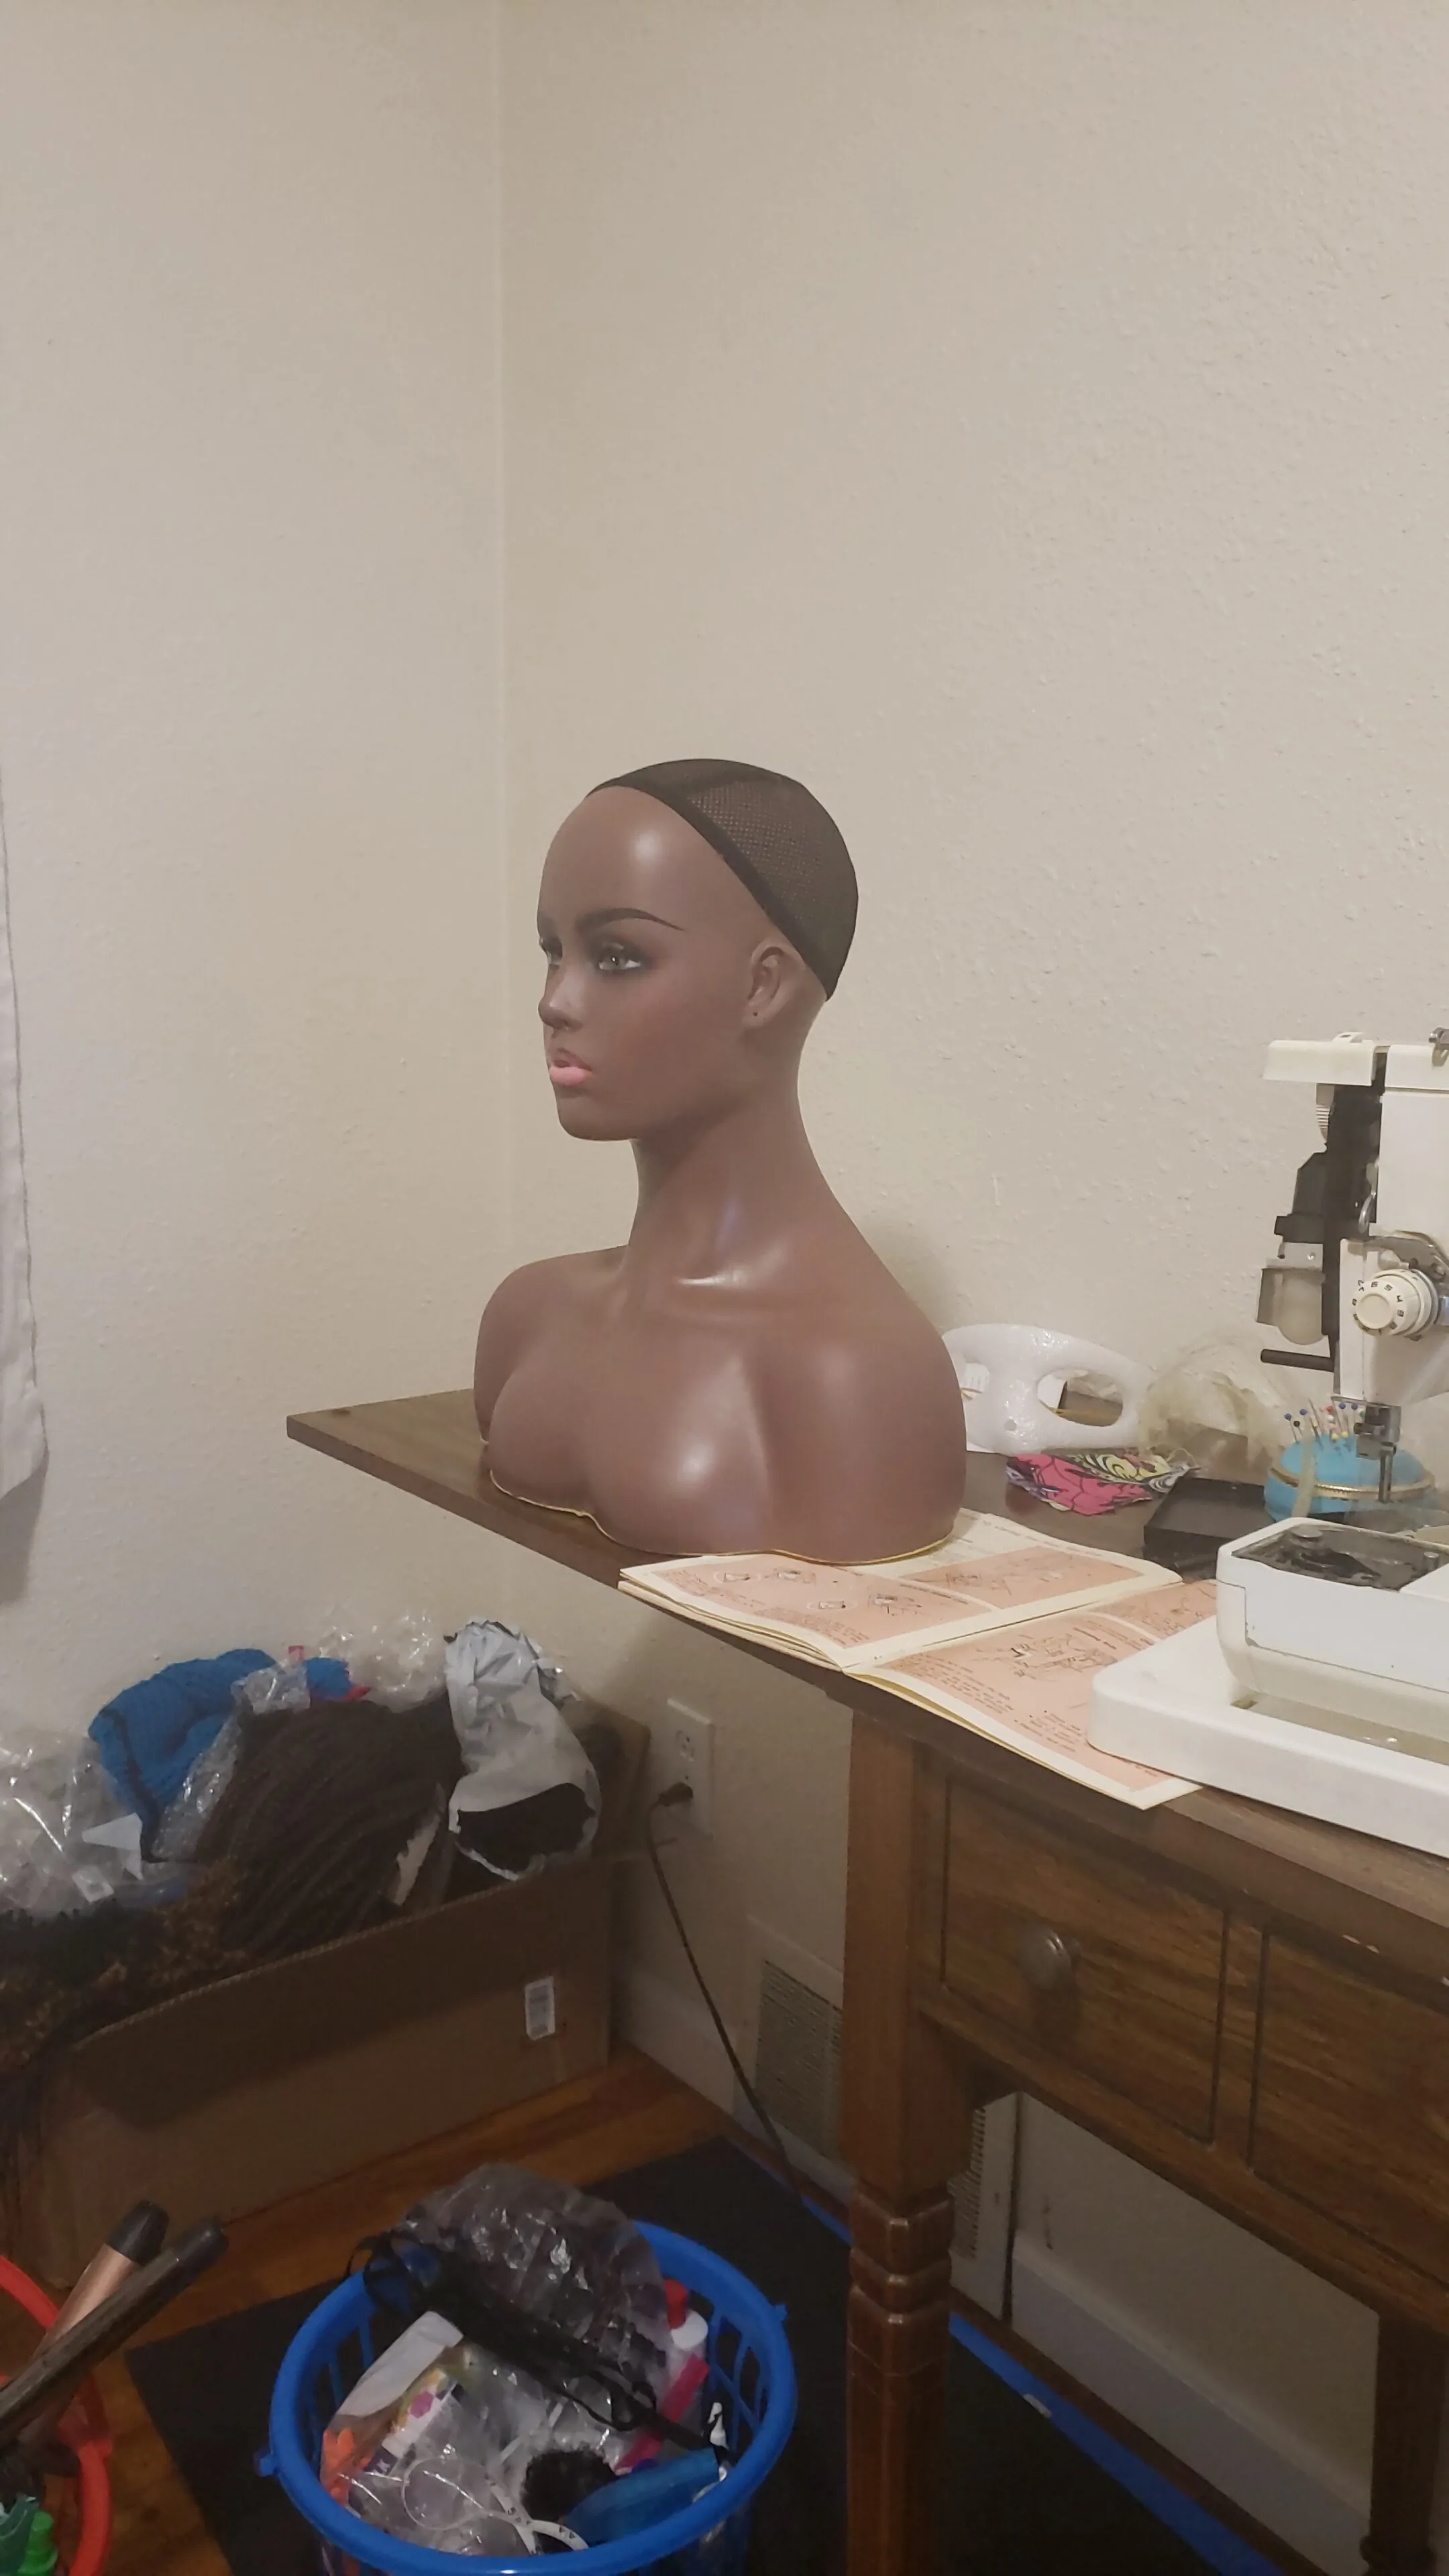 new female realistic wig mannequin head